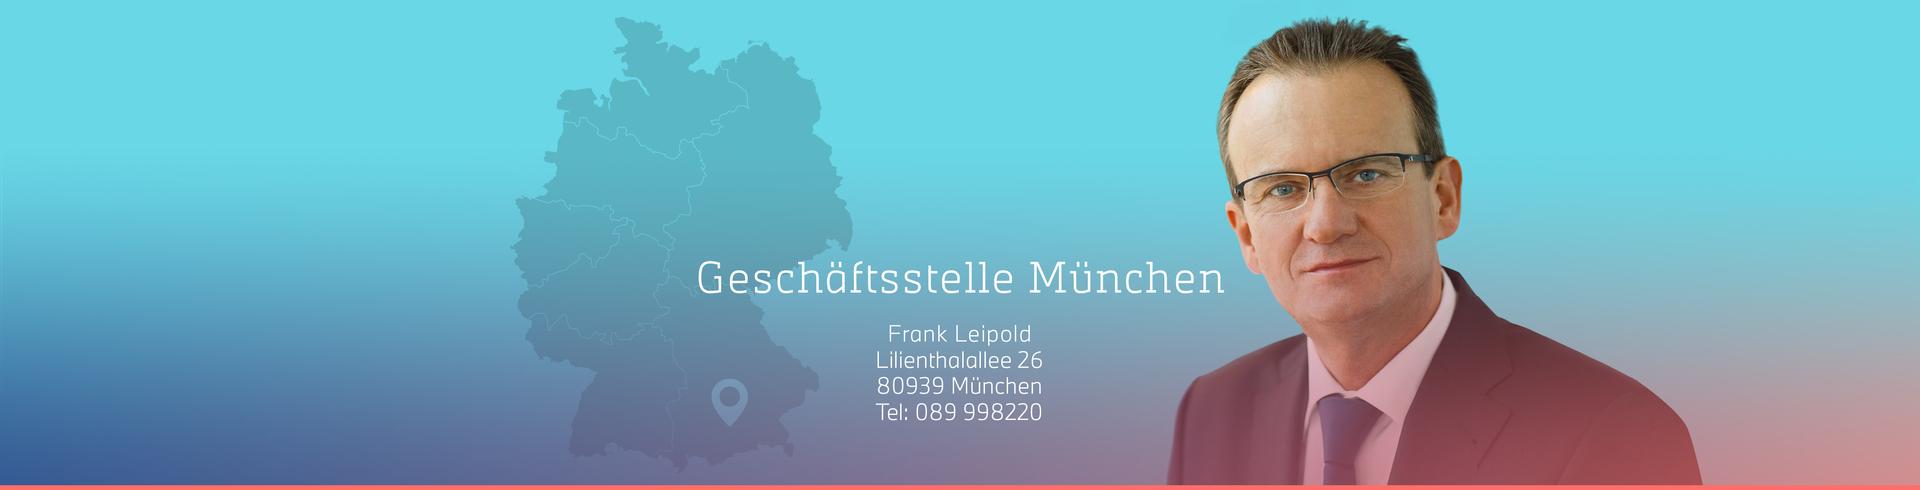 Frank Leipold_GST_Muenchen